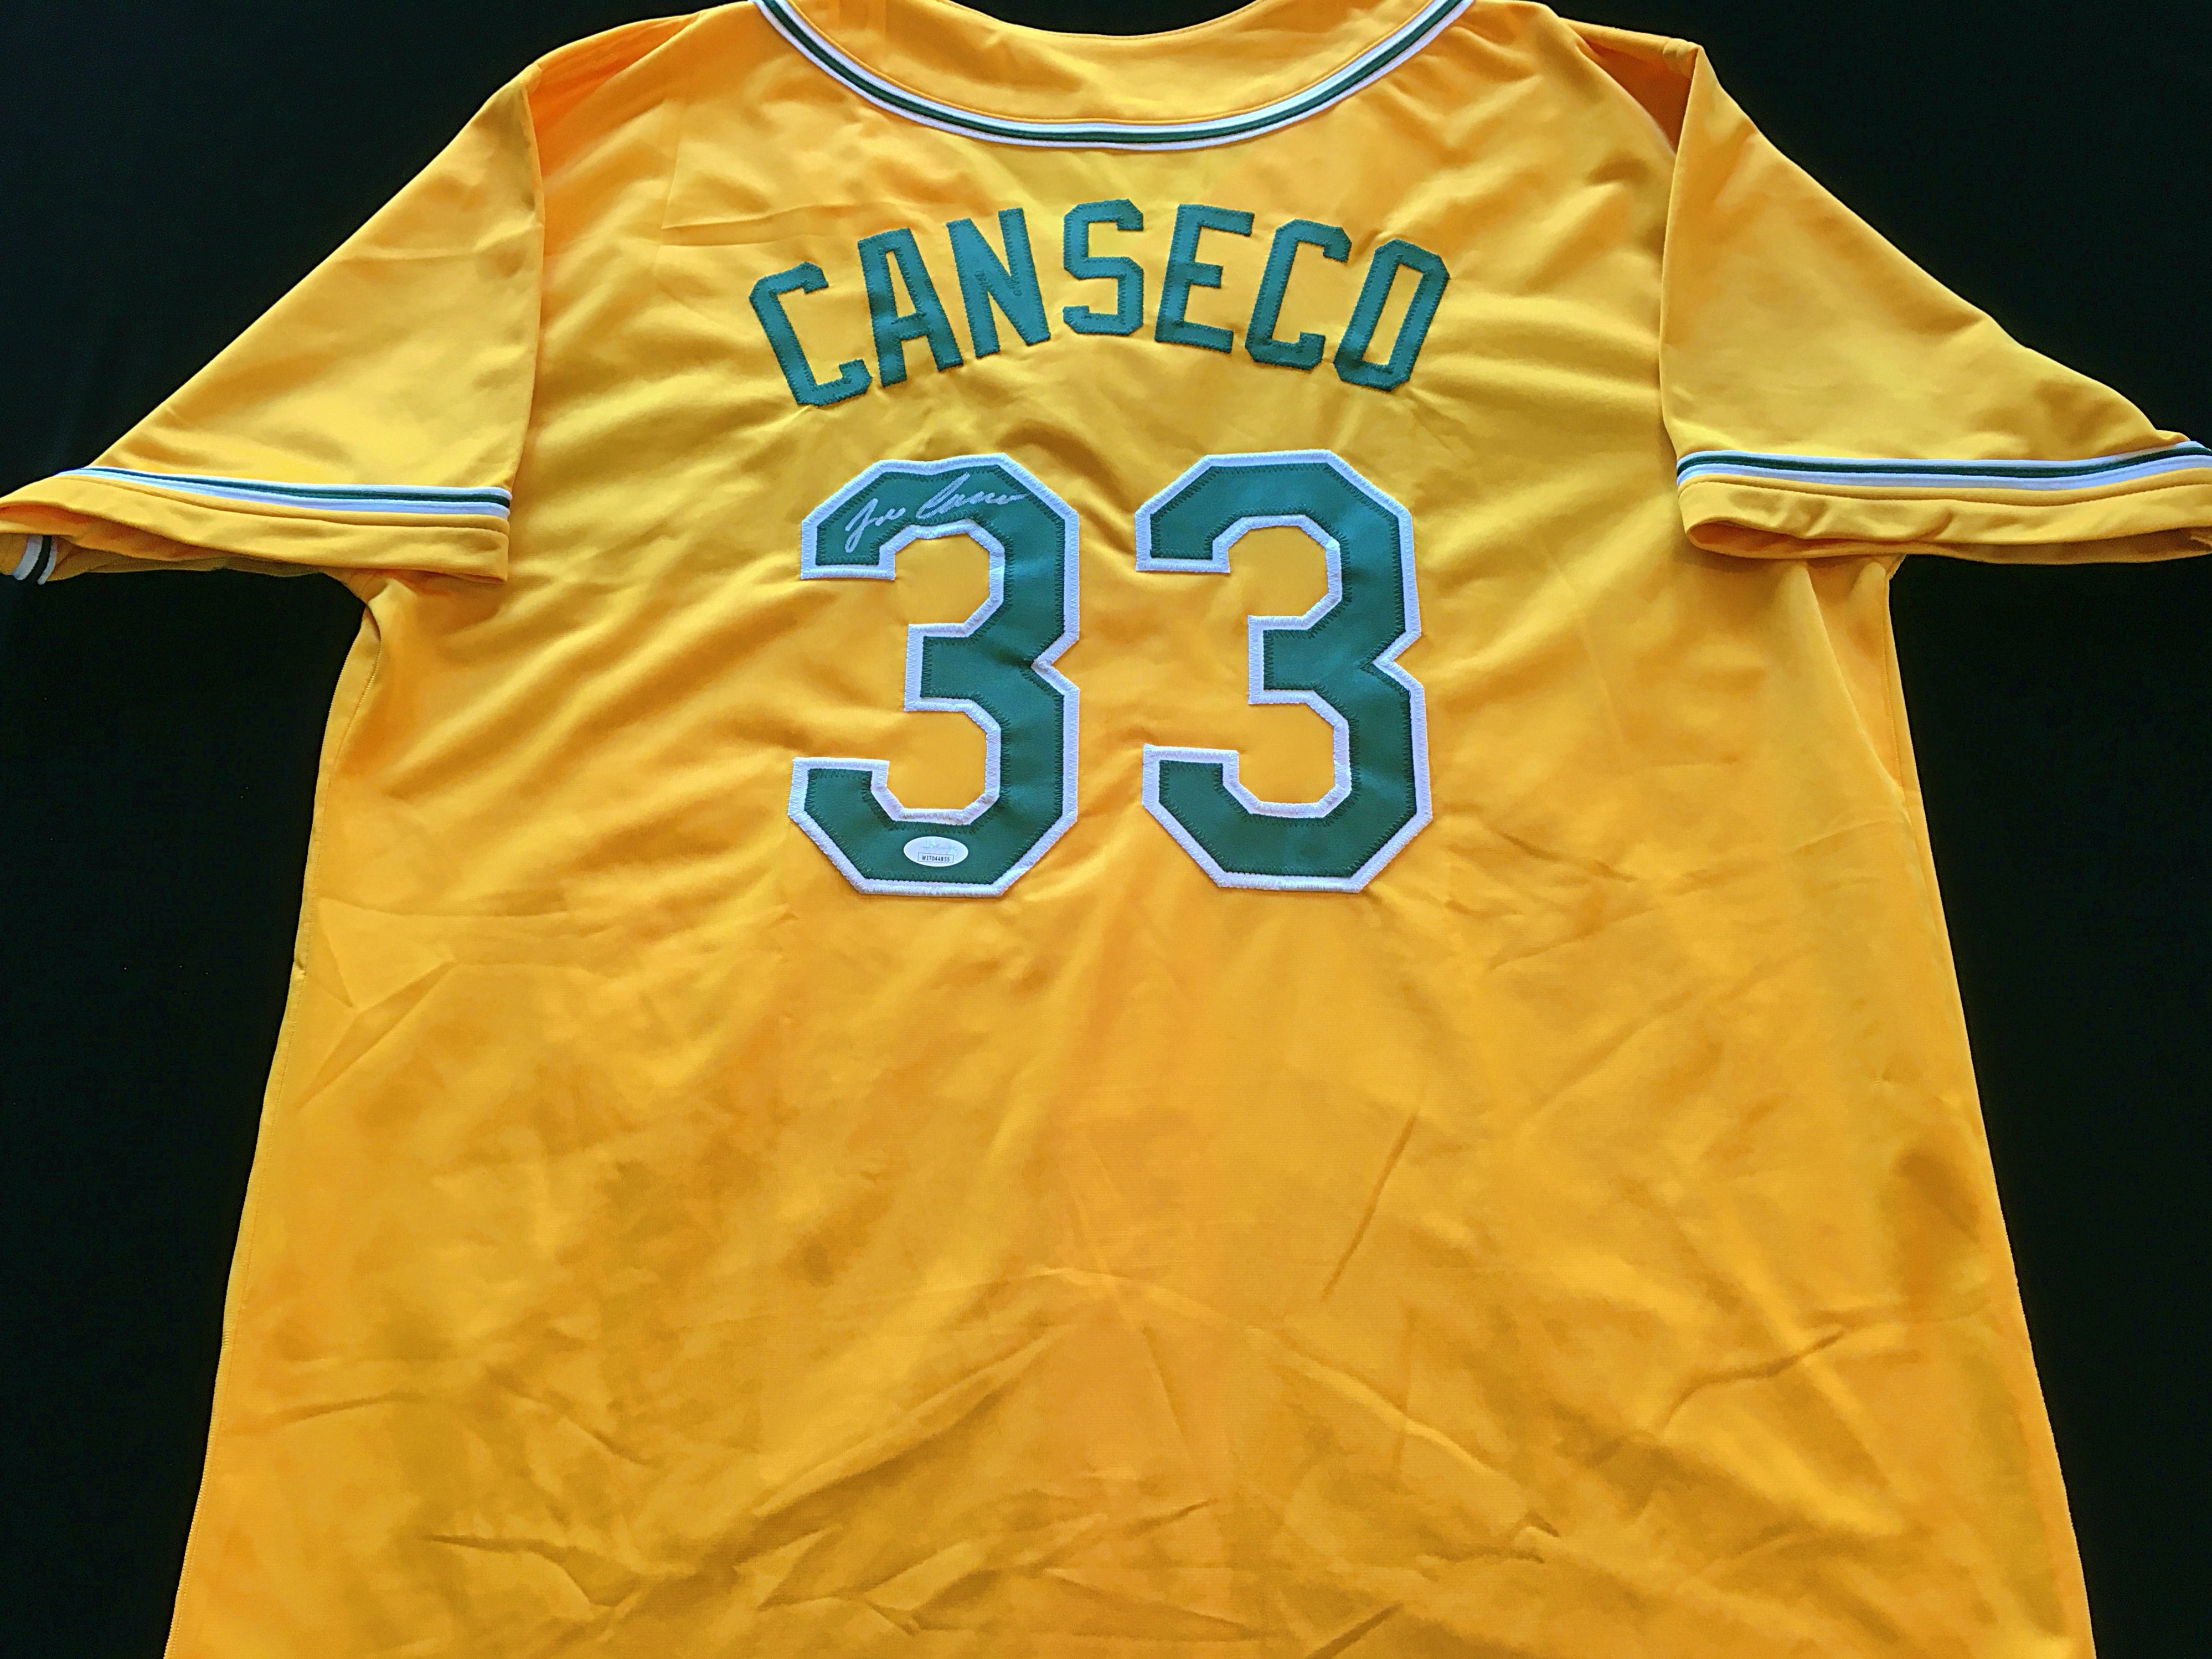 Jose Canseco Autographed Yellow Baseball Jersey